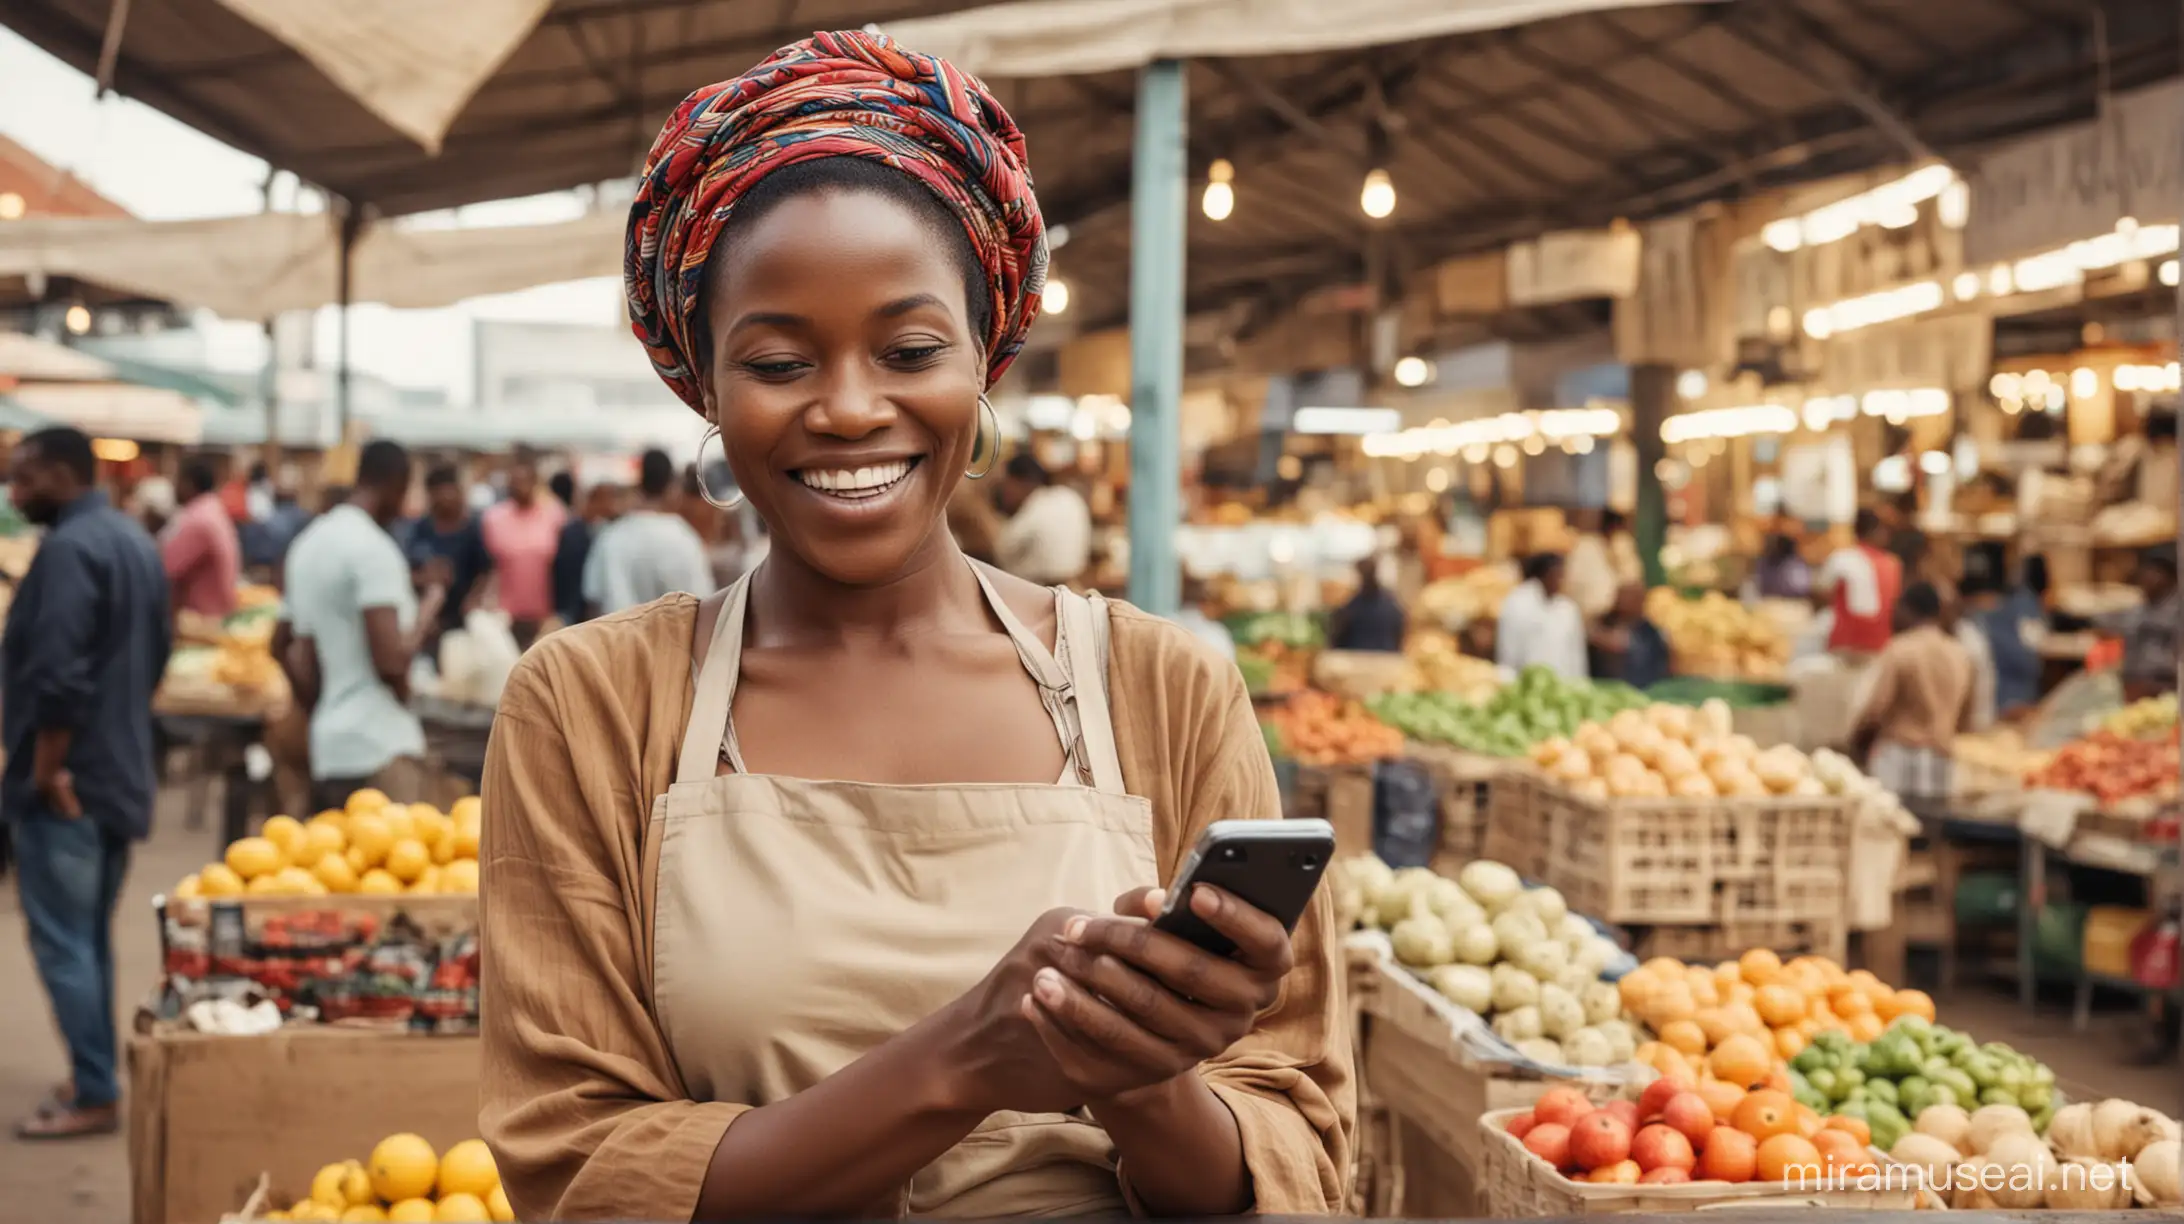 Mature African vendor reading text message on mobile phone with happy look on her face at the market